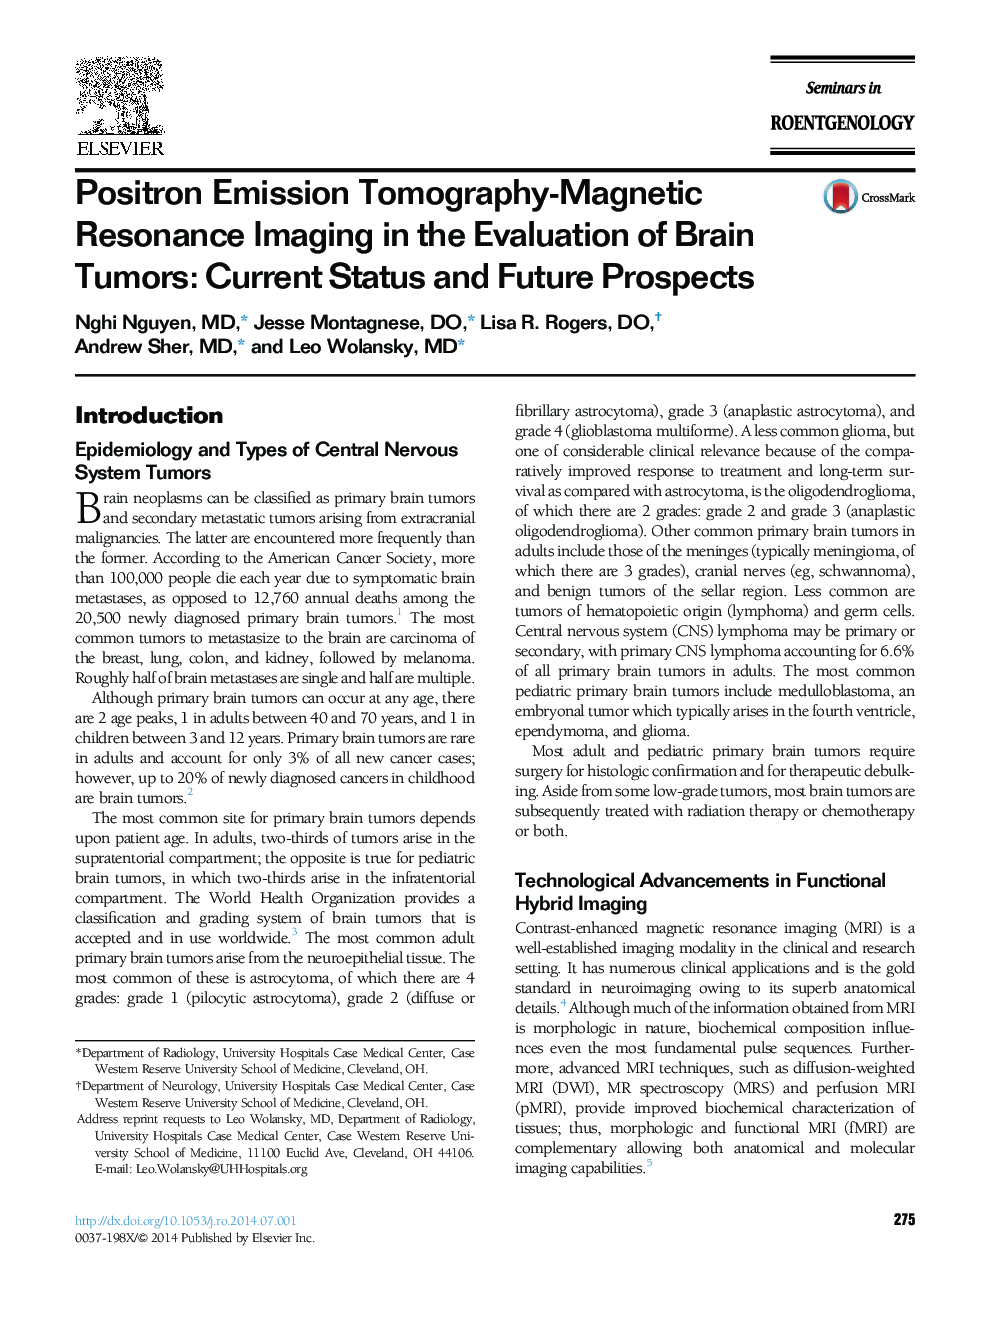 Positron Emission Tomography-Magnetic Resonance Imaging in the Evaluation of Brain Tumors: Current Status and Future Prospects